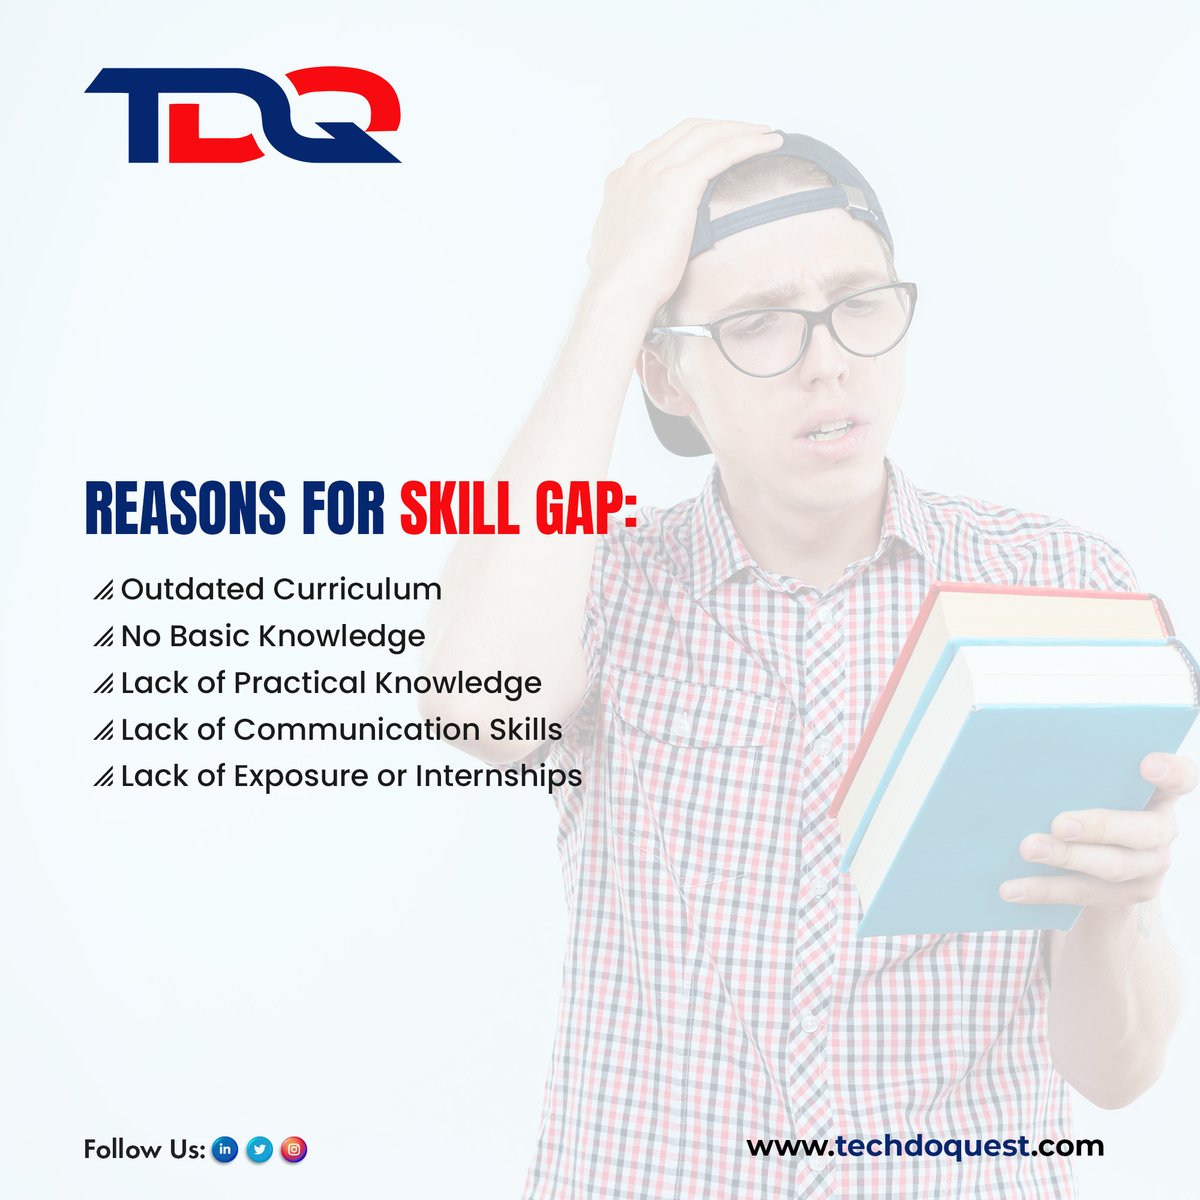 The reasons for the skill gap in 🇮🇳's tech industry are the outdated curriculum, lack of basic knowledge, practical knowledge, communication skills, and exposure/internships.

#TechTalentCrunch #IndiaSkillGap #NewAgeSkillsShortage #OutdatedCurriculum  #Techdoquest #TDQ